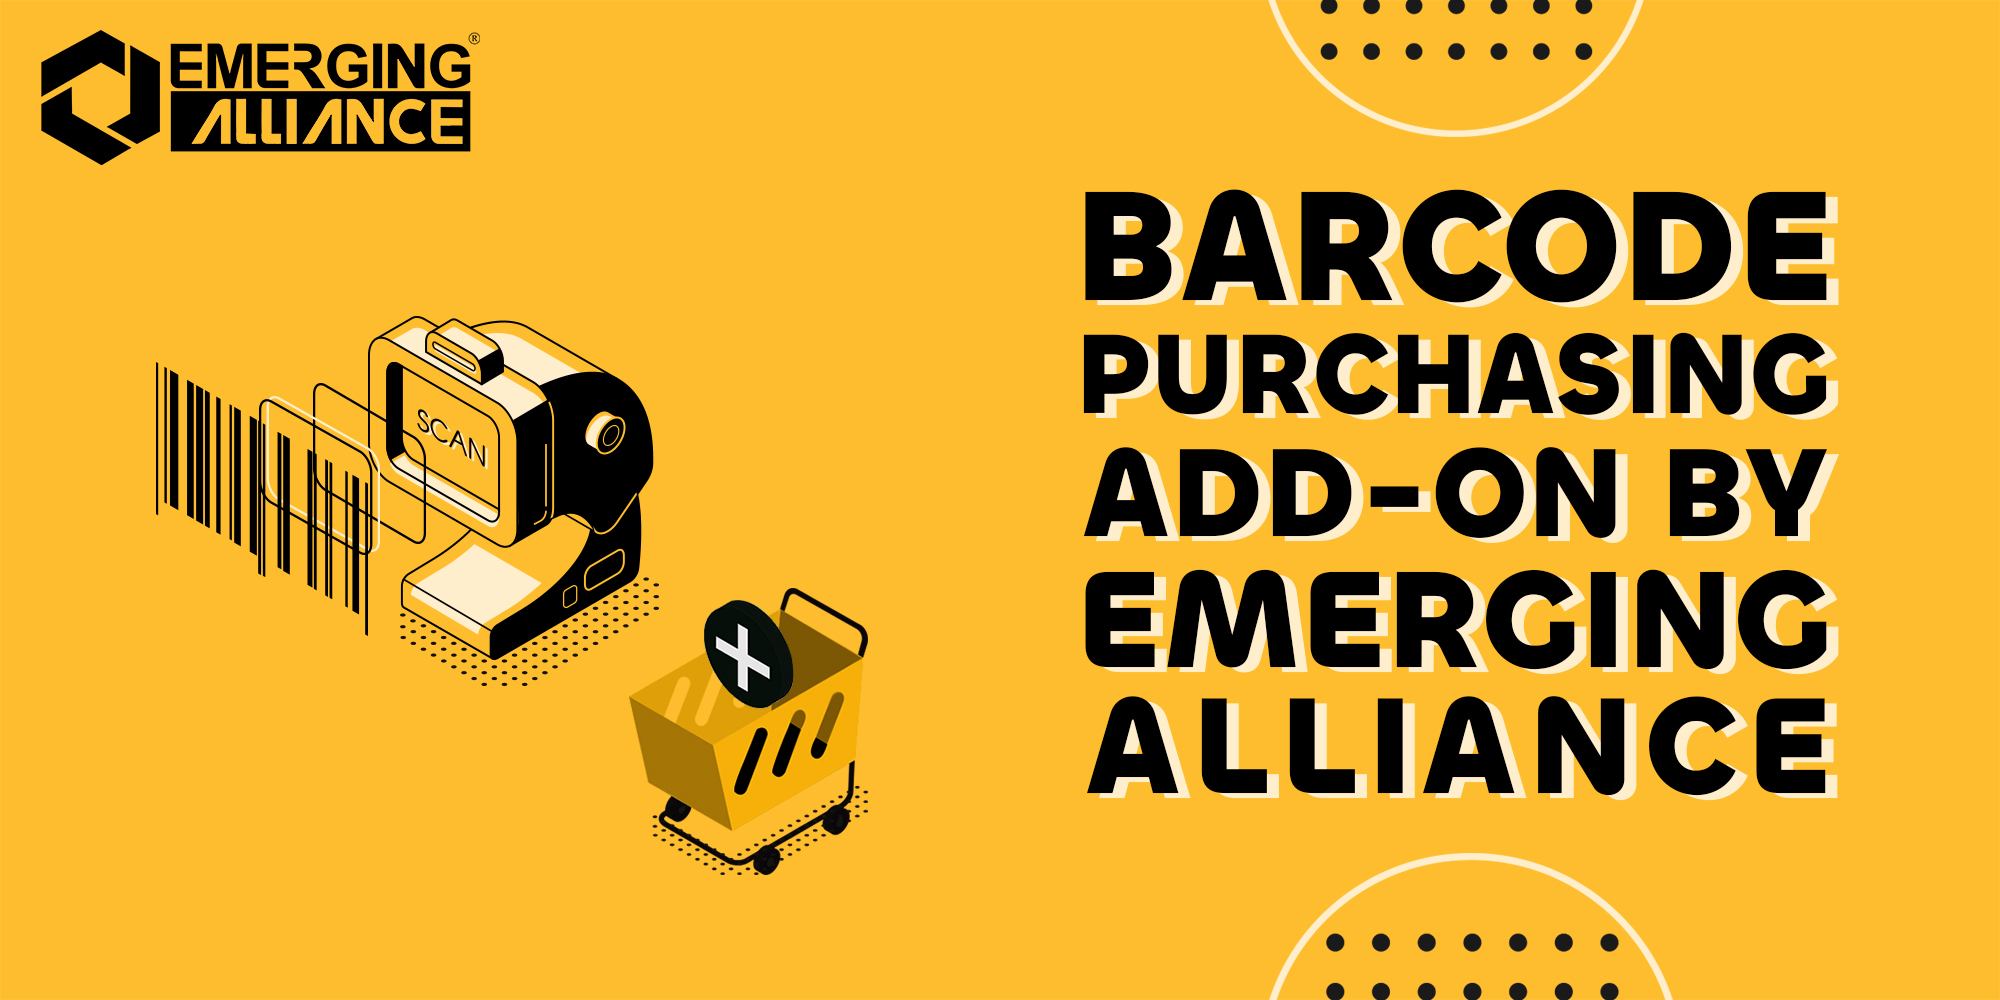 BARCODE PURCHASING ADD ON BY EMERGING ALLIANCE